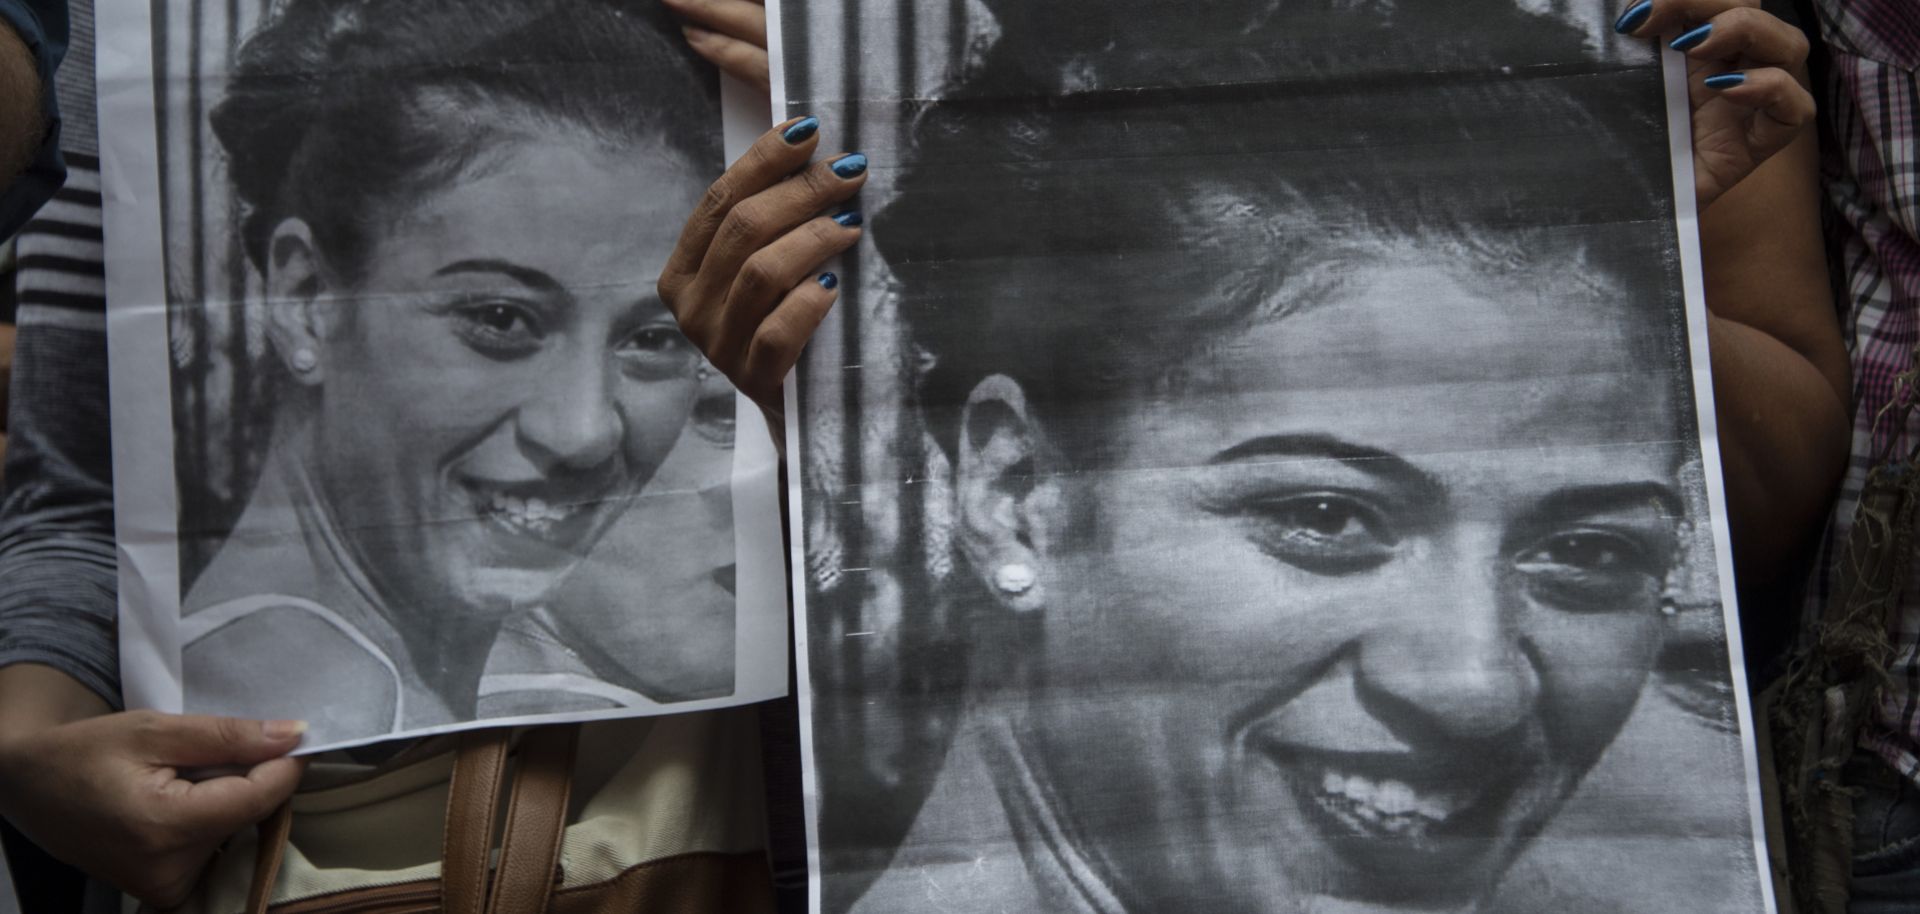 Protesters hold pictures of Valeria Sosa, a 29-year-old dancer killed by her former partner, as they march to condemn violence against women in Montevideo, Uruguay, on Feb. 2, 2017.